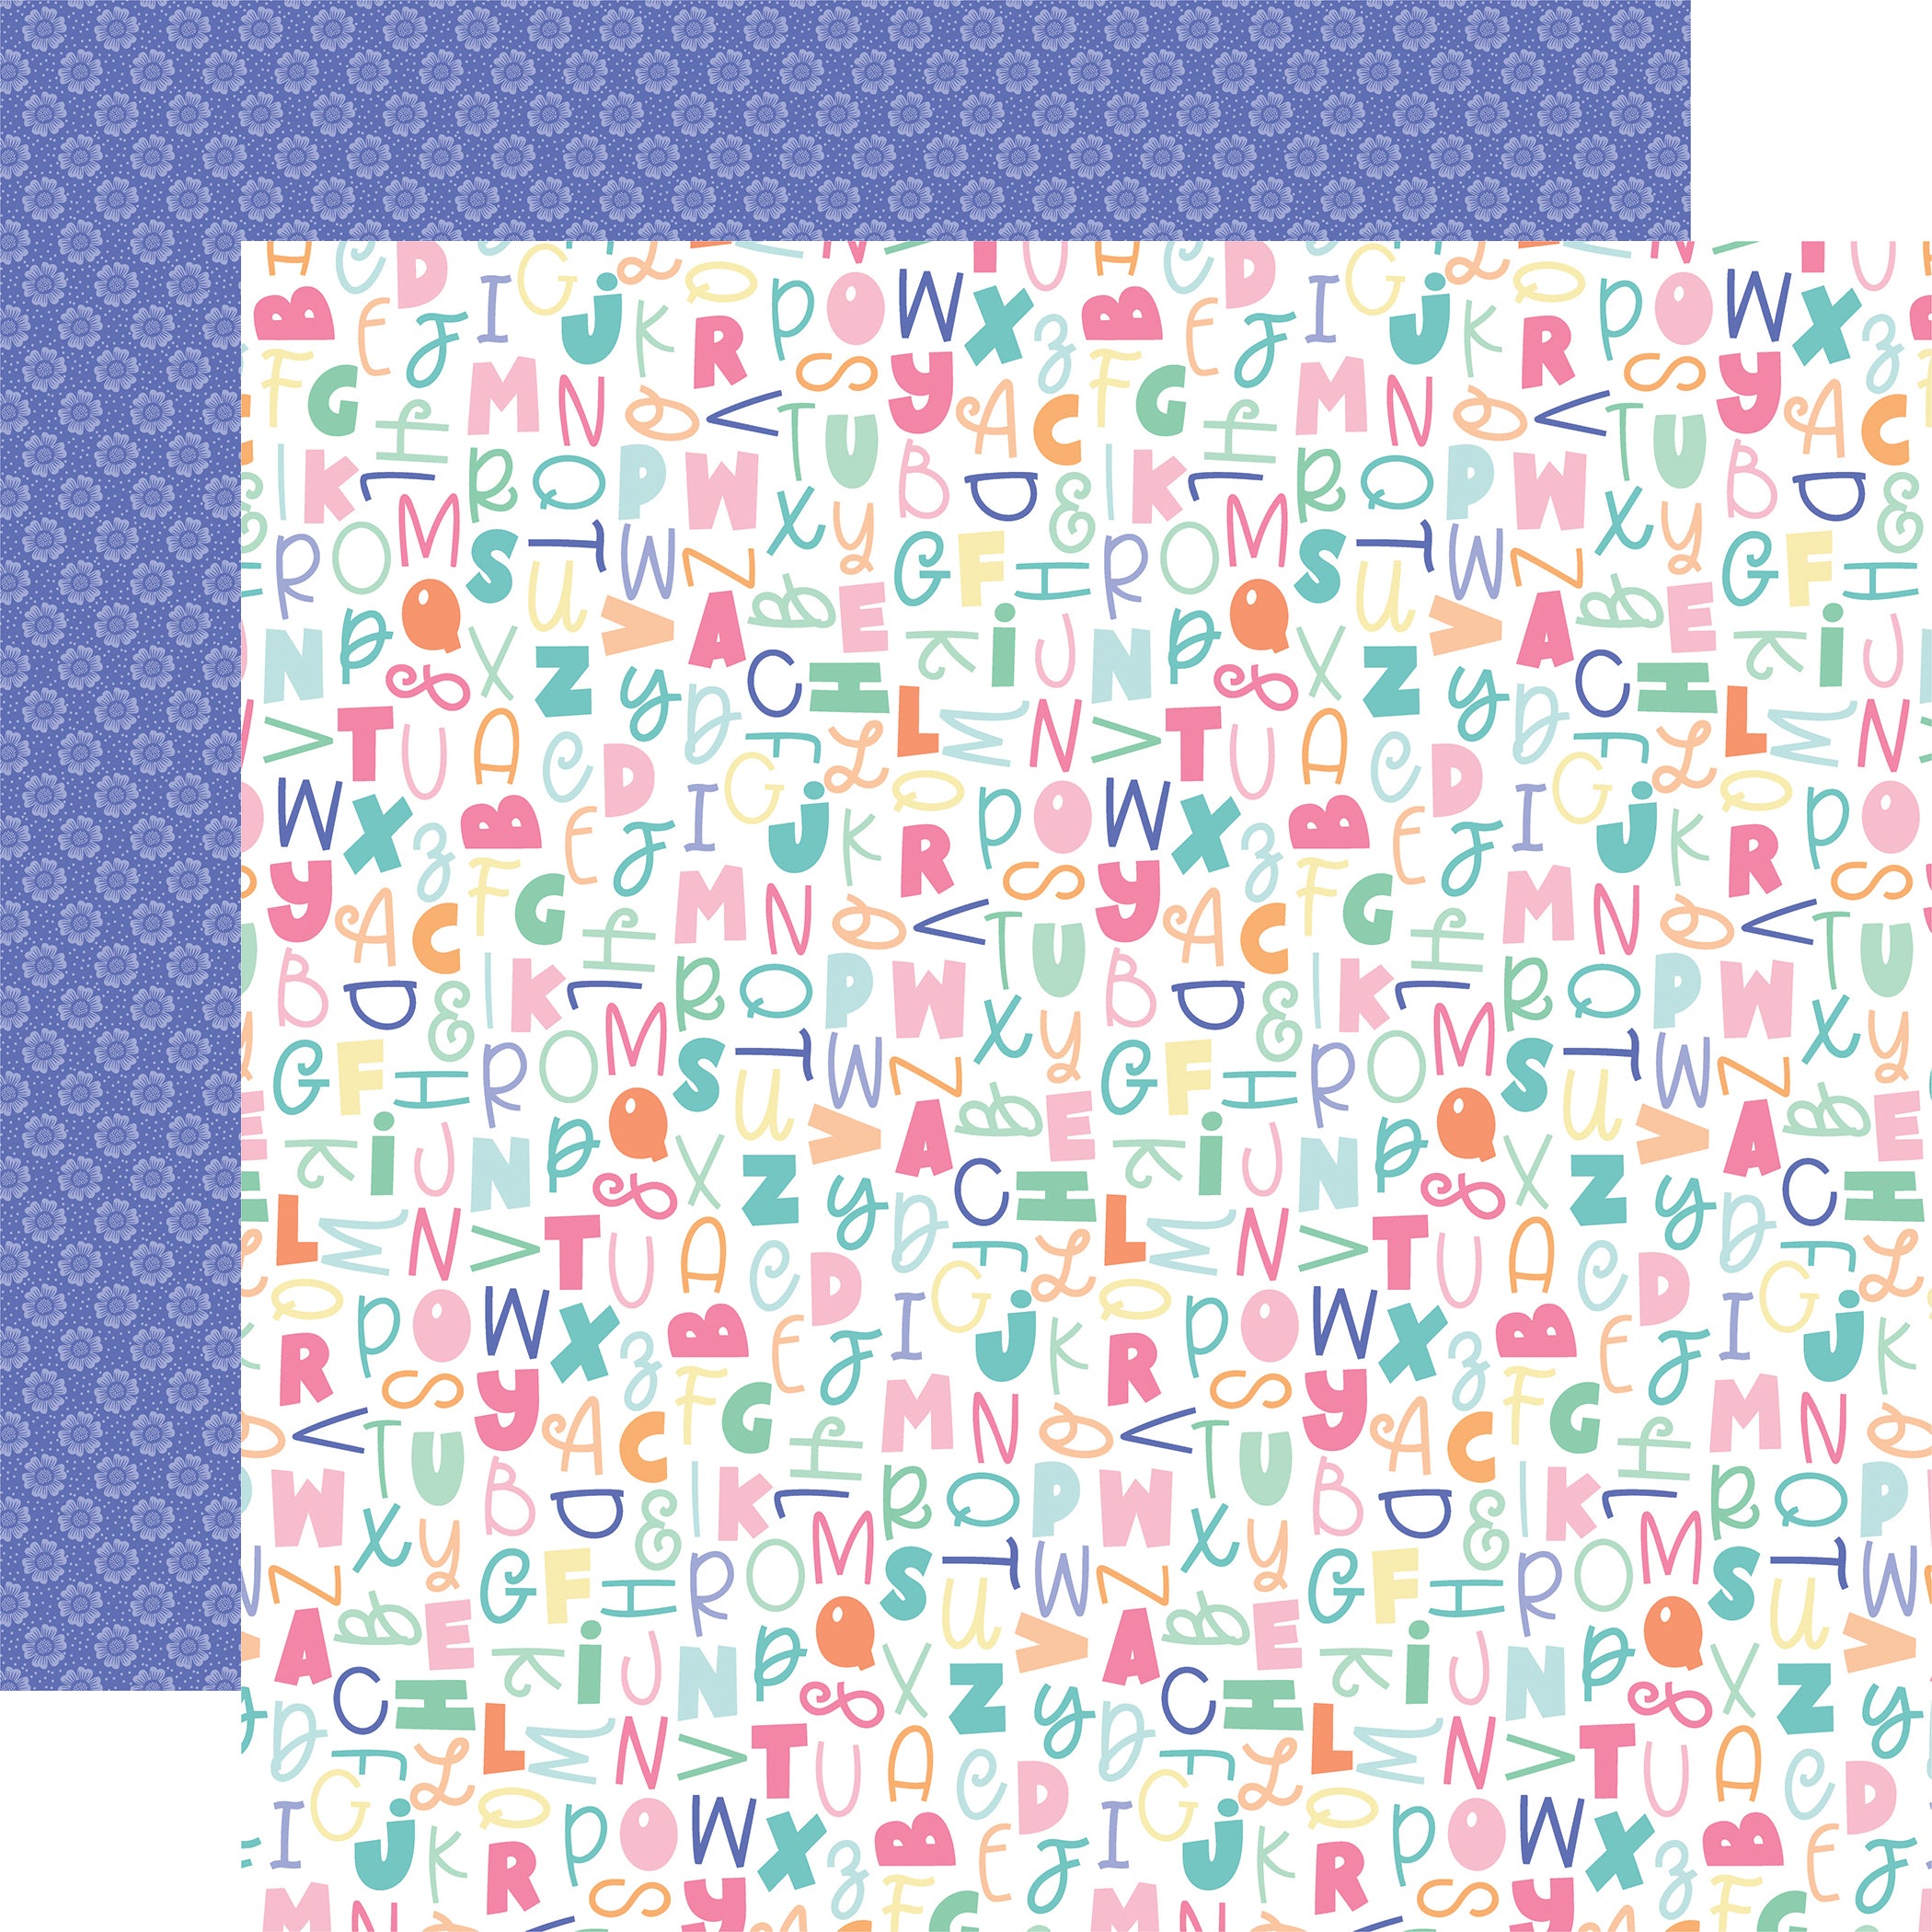 My Little Girl Collection My ABC's 12 x 12 Double-Sided Scrapbook Paper by Echo Park Paper